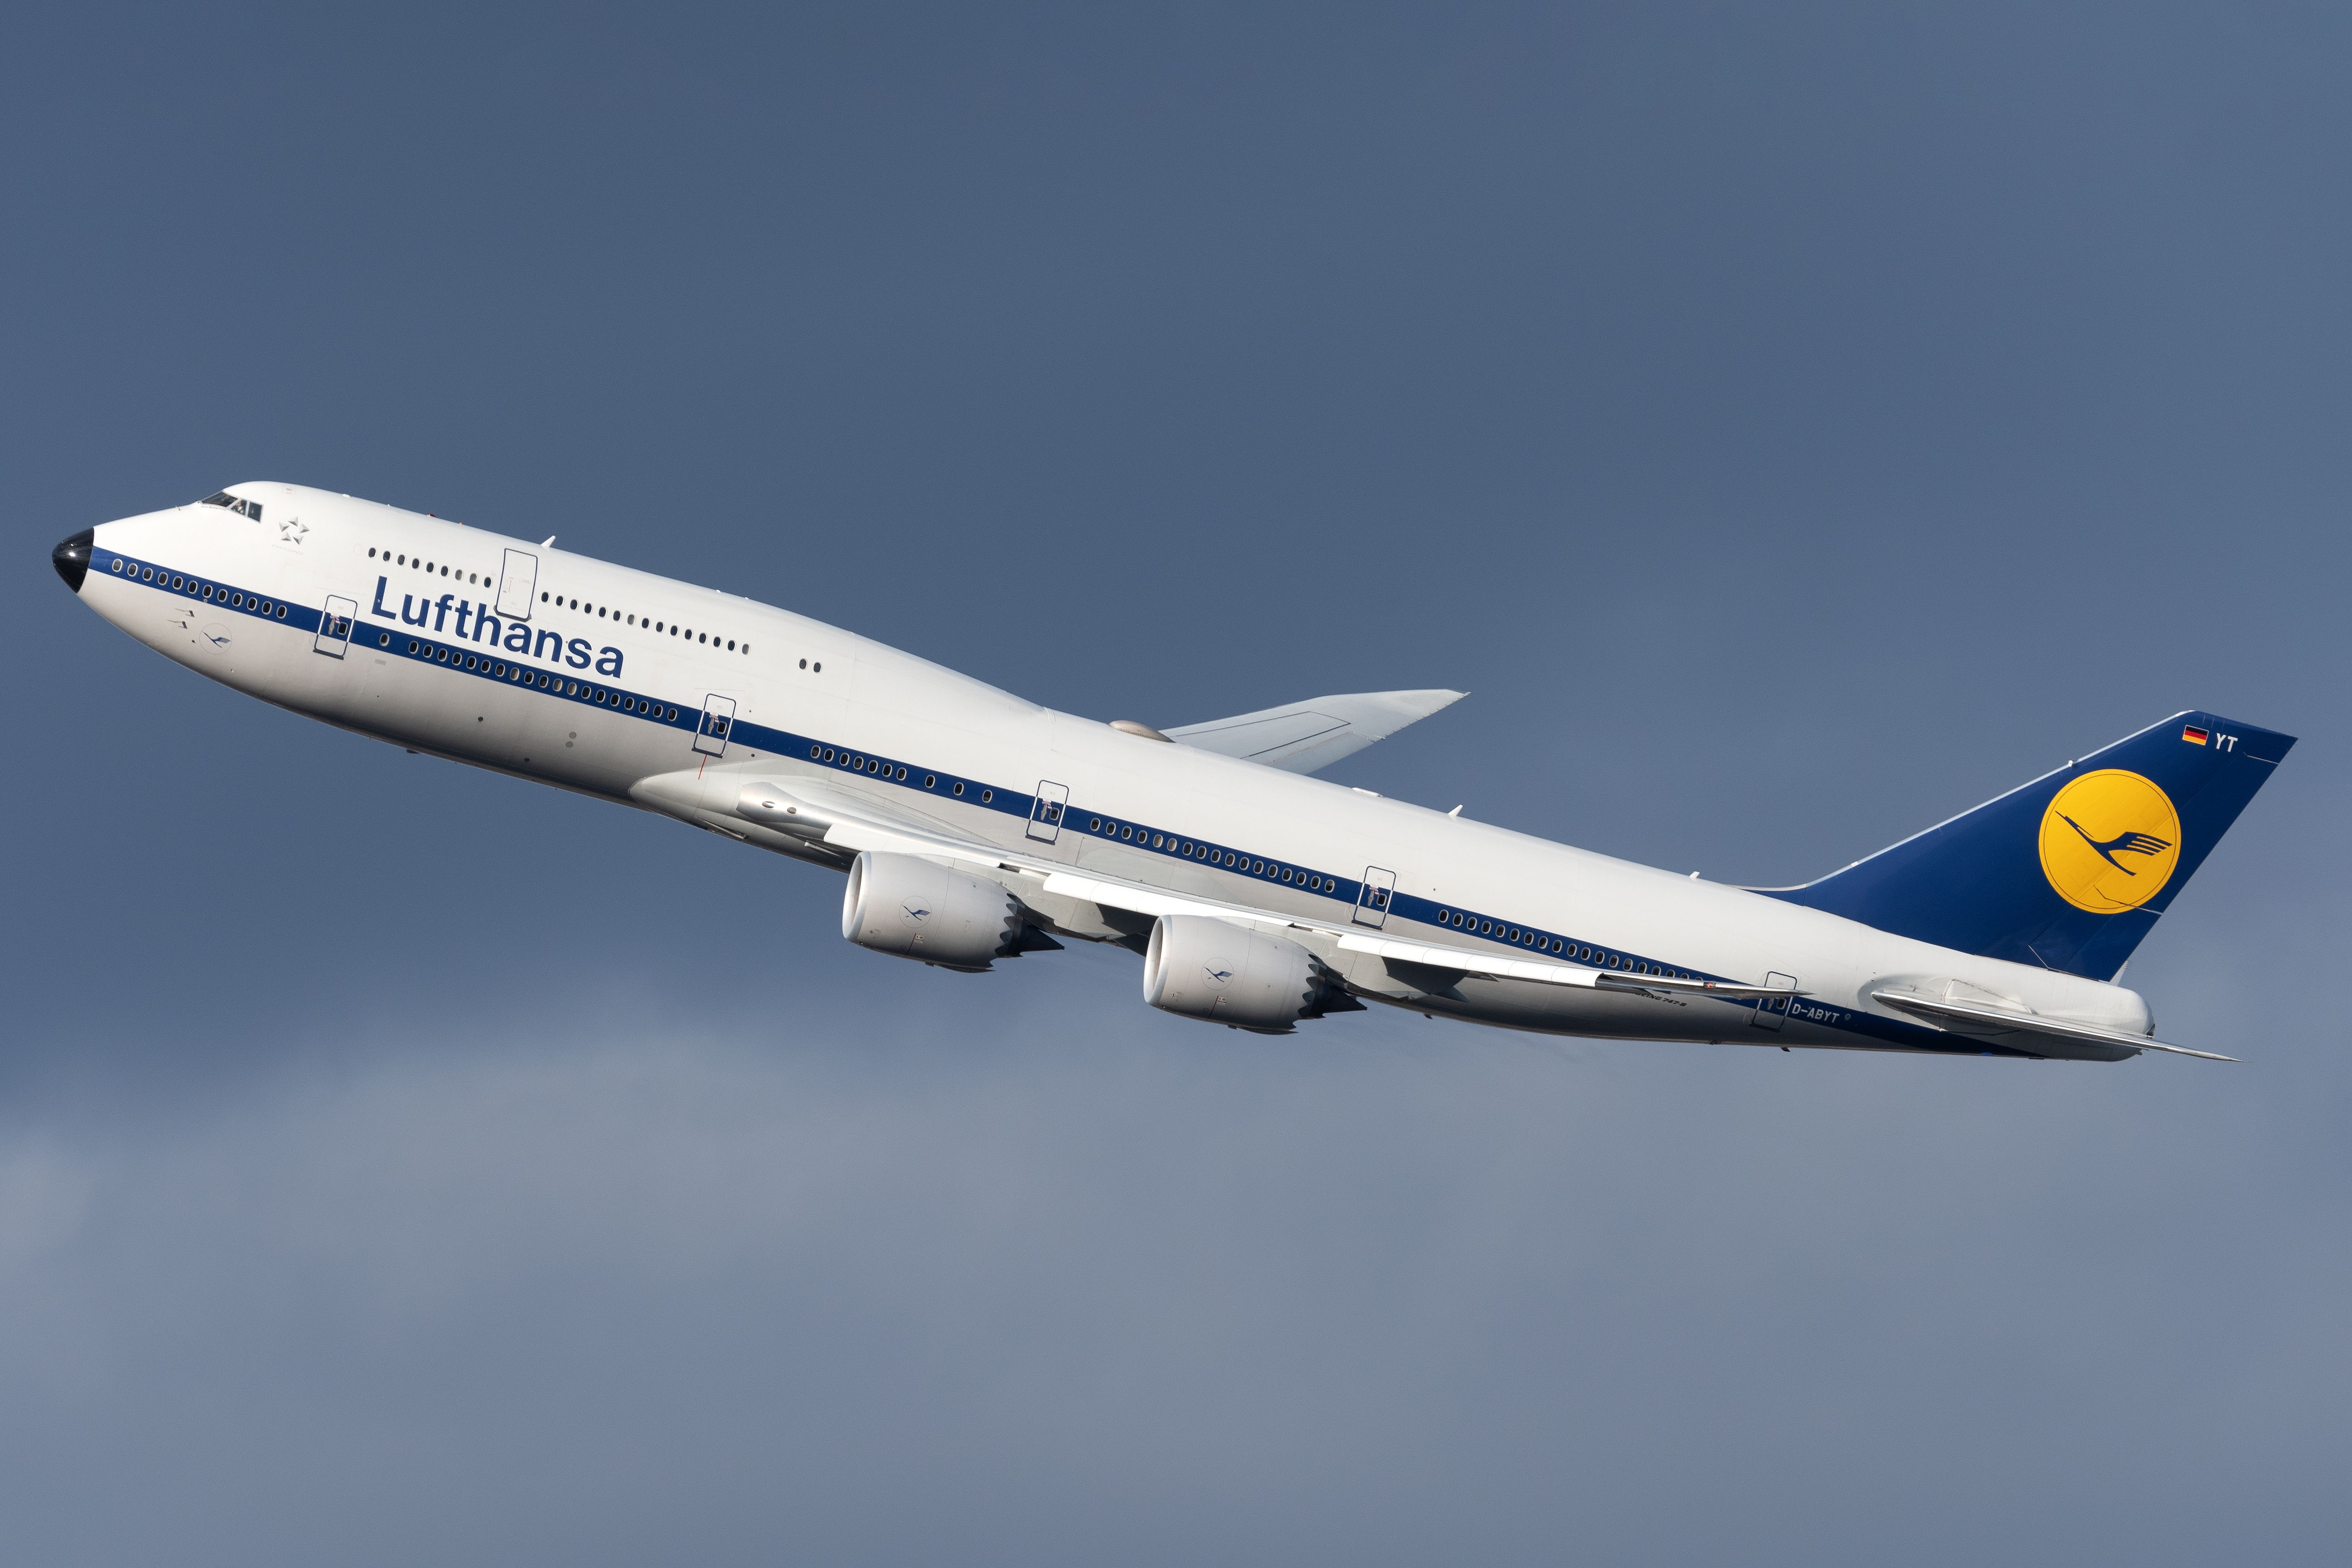 A Lufthansa Boeing 747-830 in Retro Livery flying in the sky.